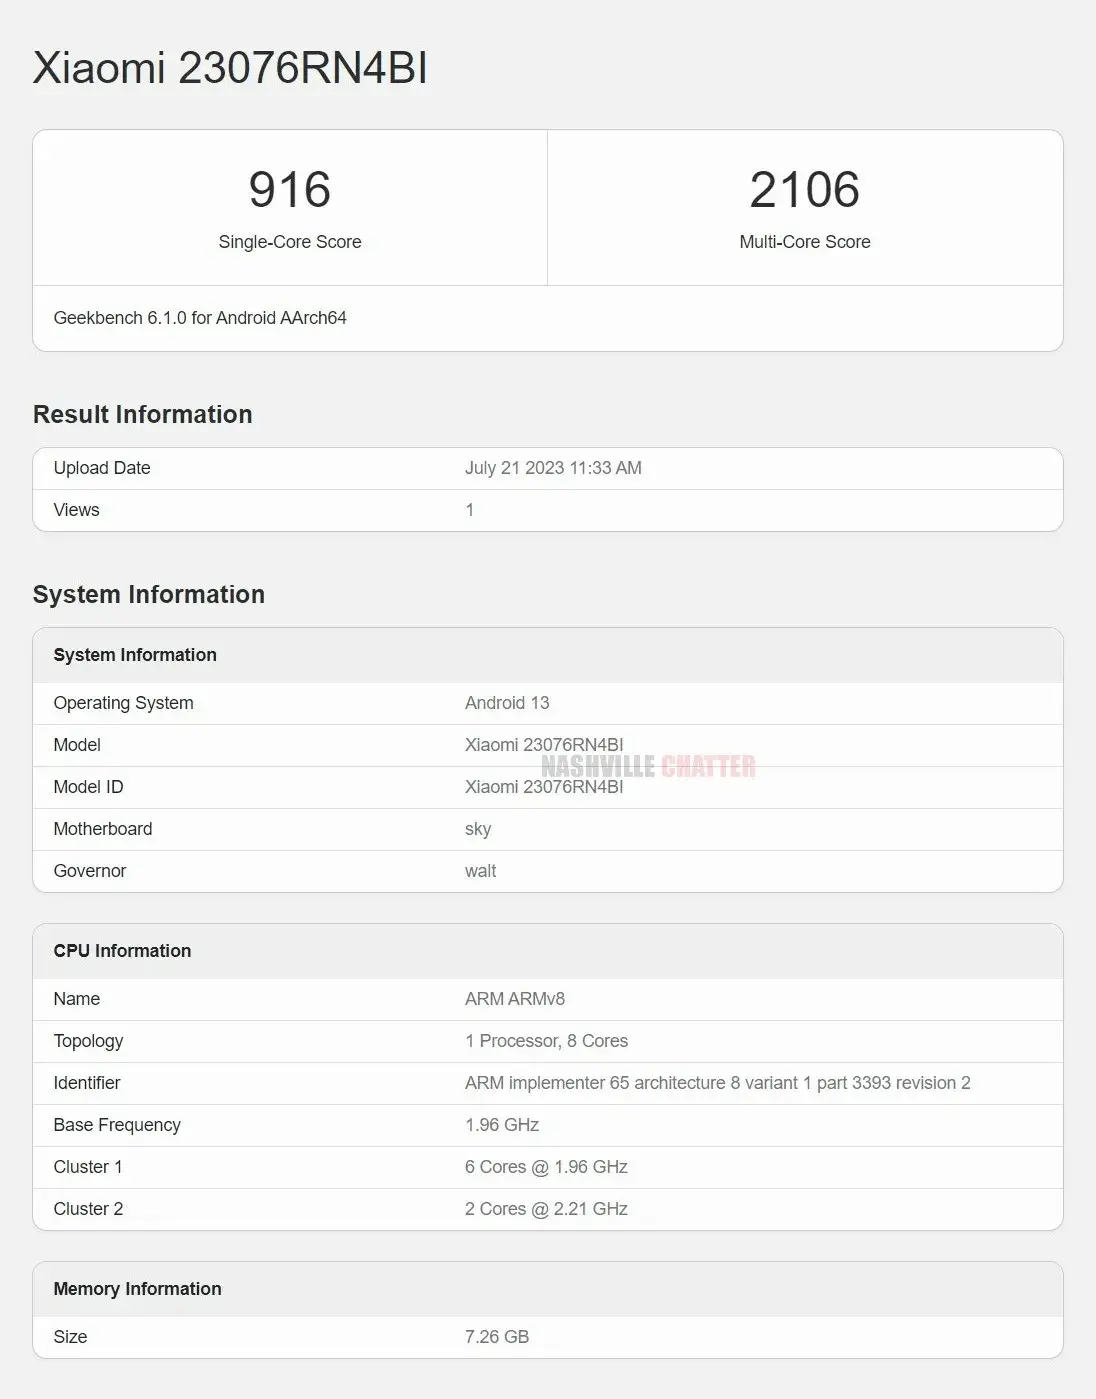 Redmi 12 5G appears on Geekbench database 